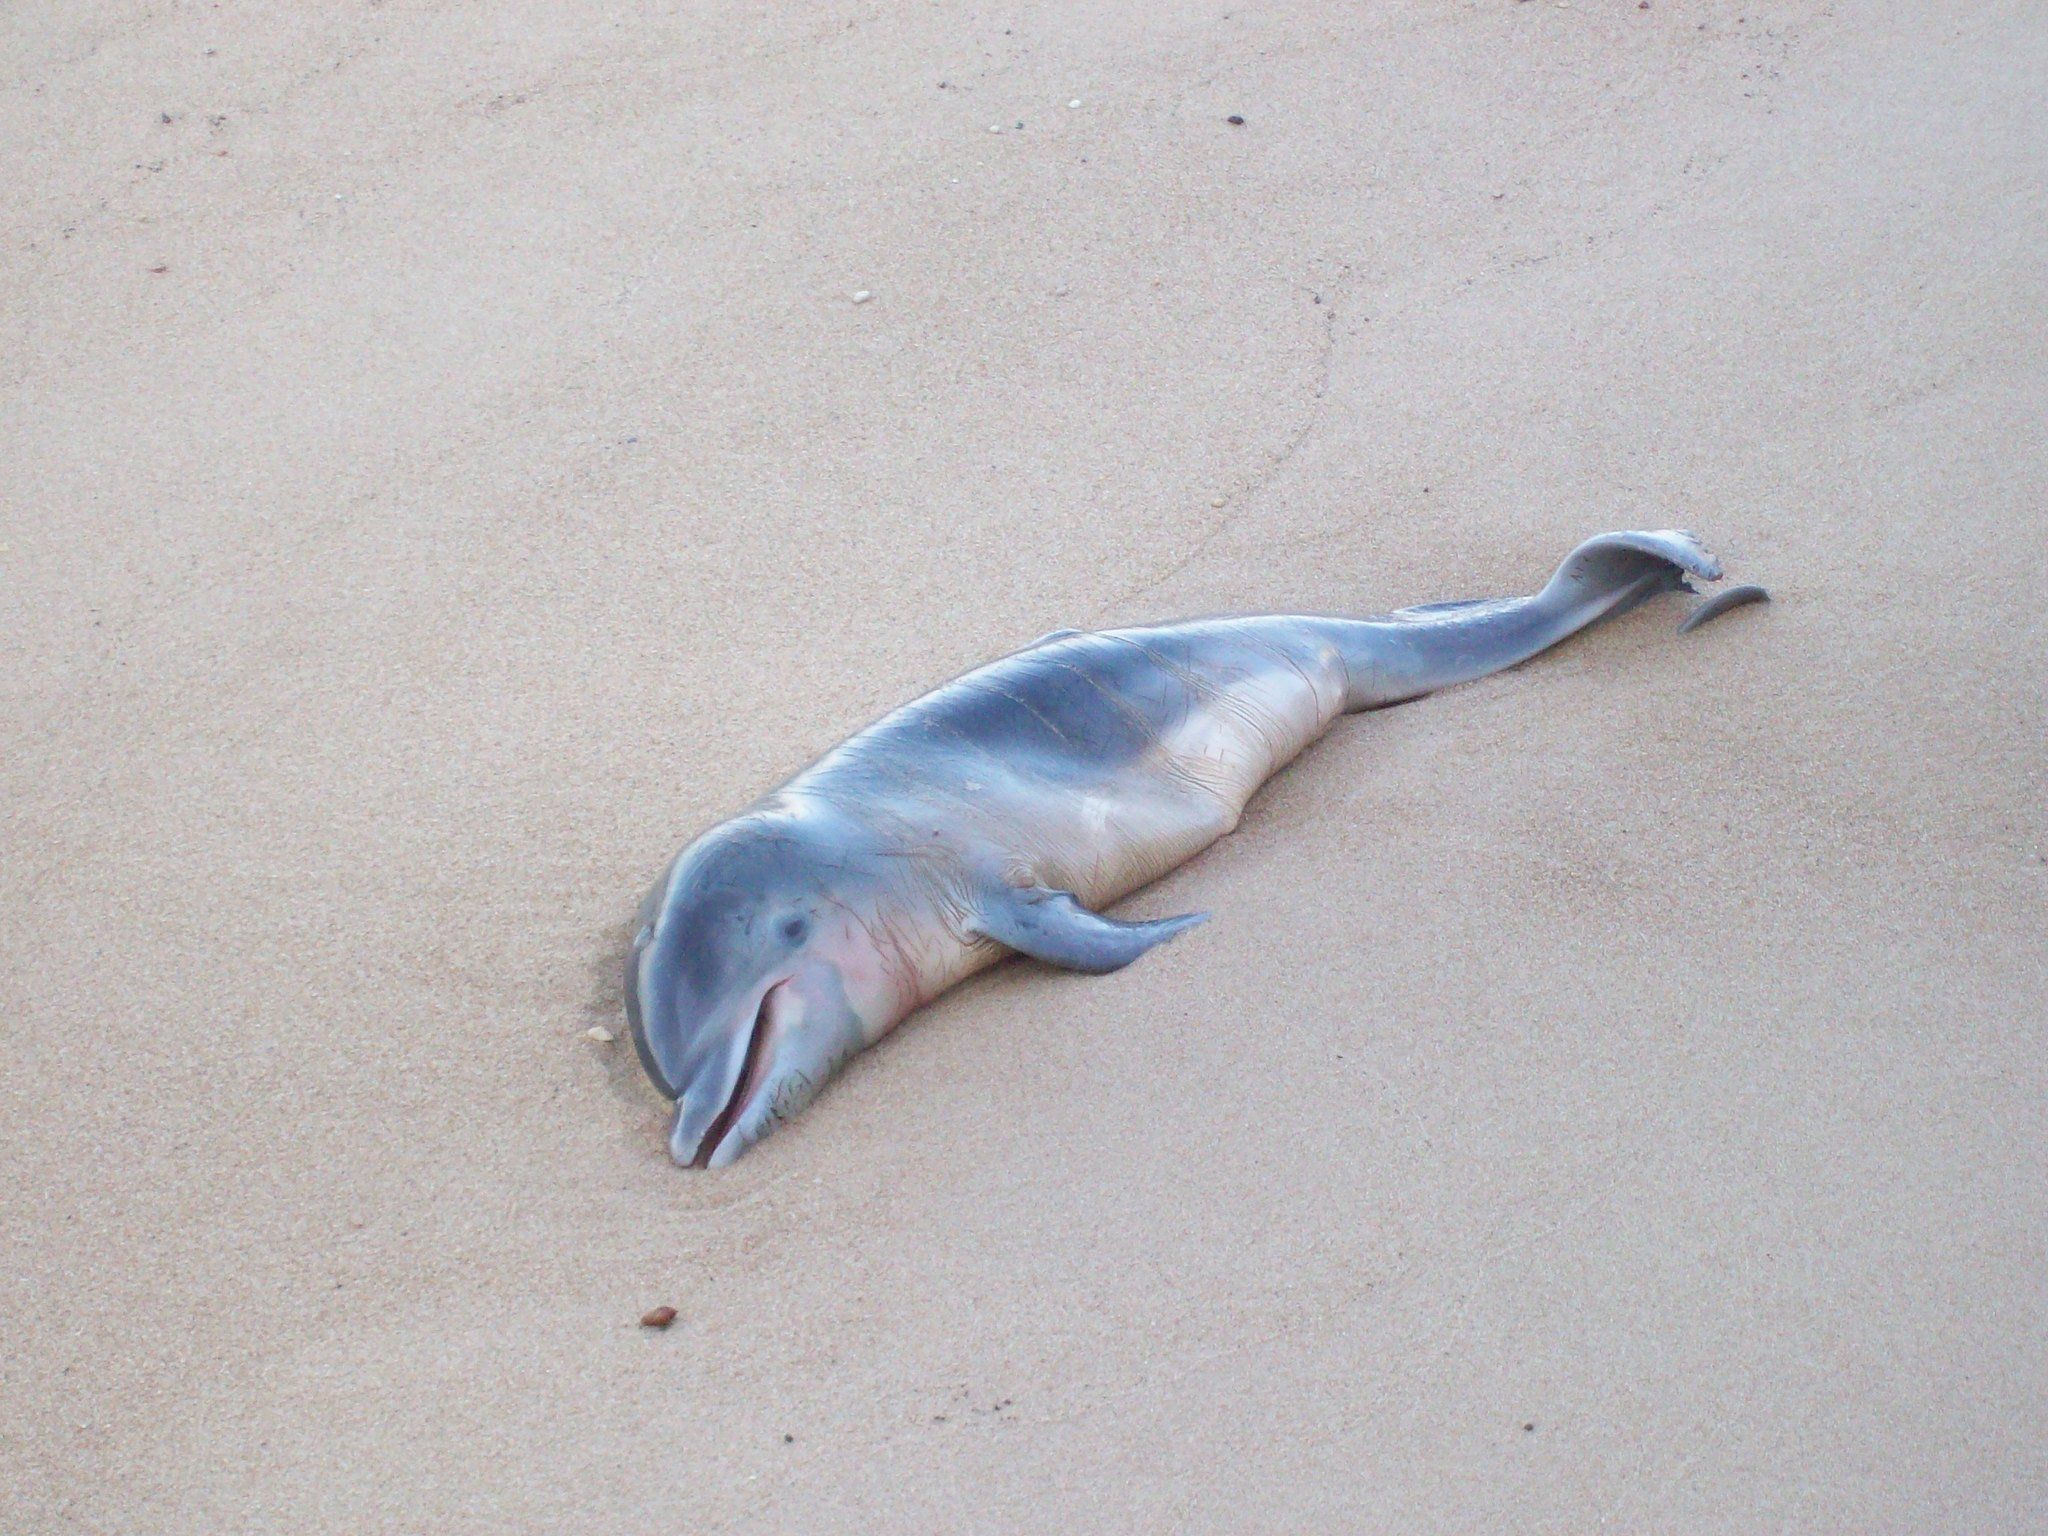 Another Dead Baby Dolphin: Shame On Social Media Driven Tourists